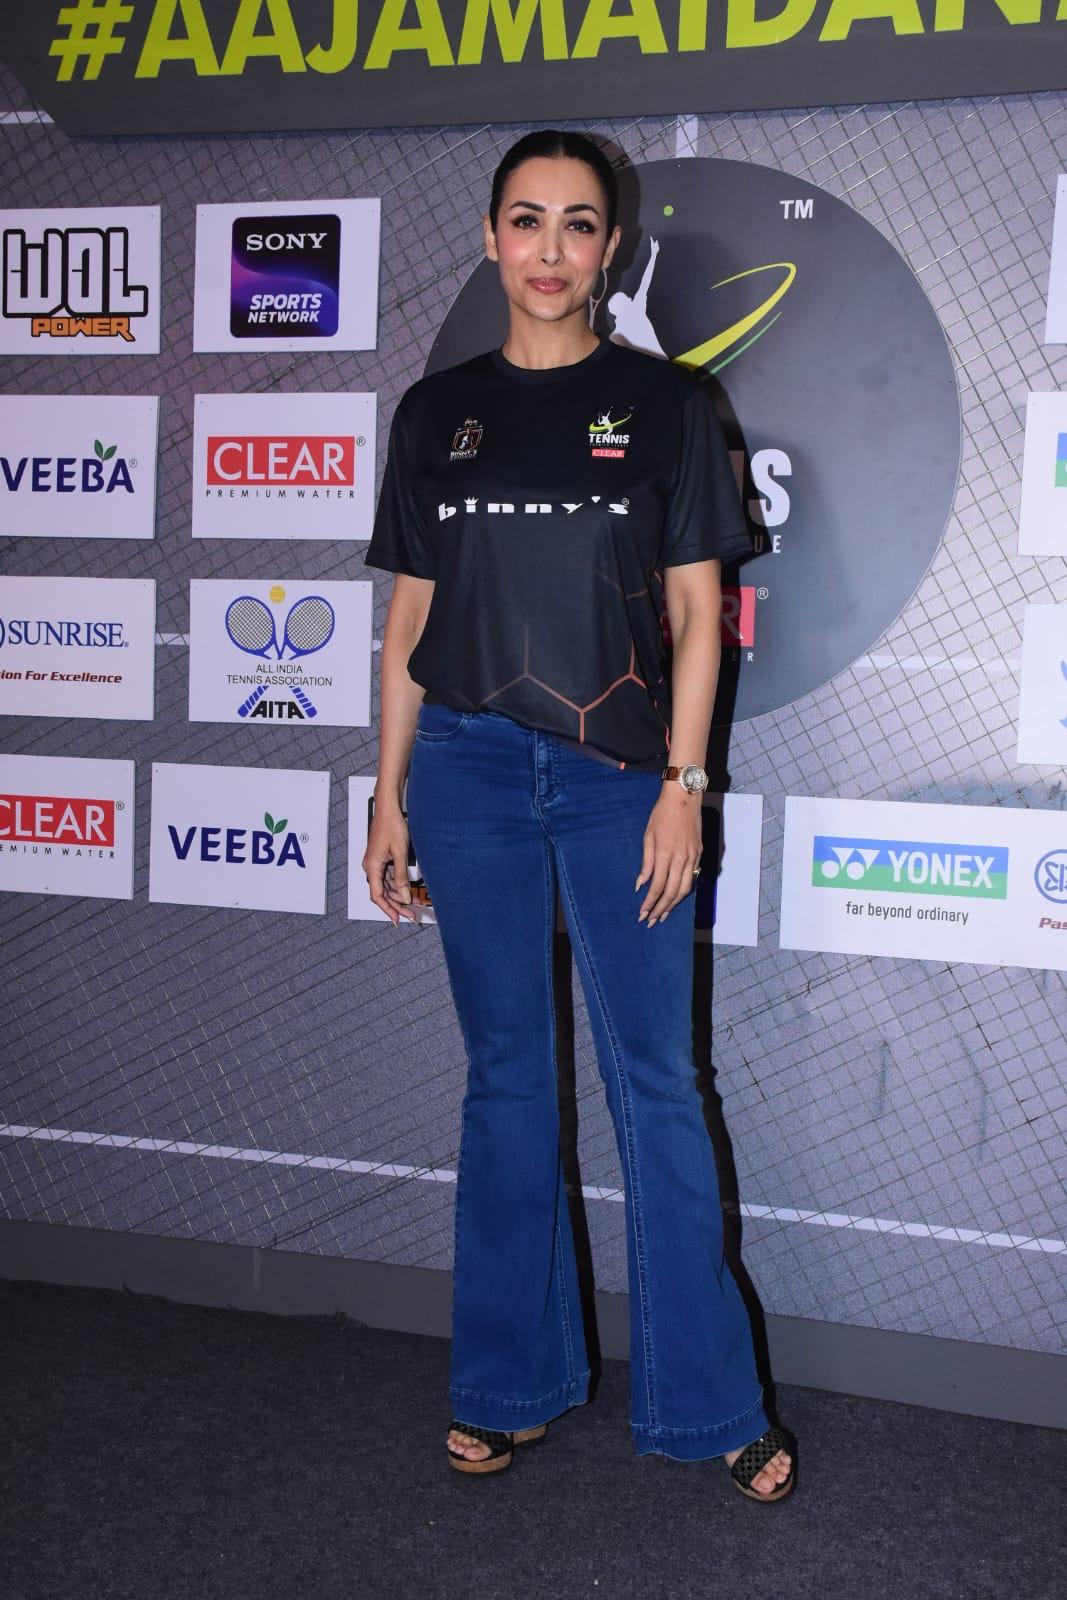 Malaika Arora was also spotted at the Sahara Star as she went to attend the Tennis Premier League season 5 auctions